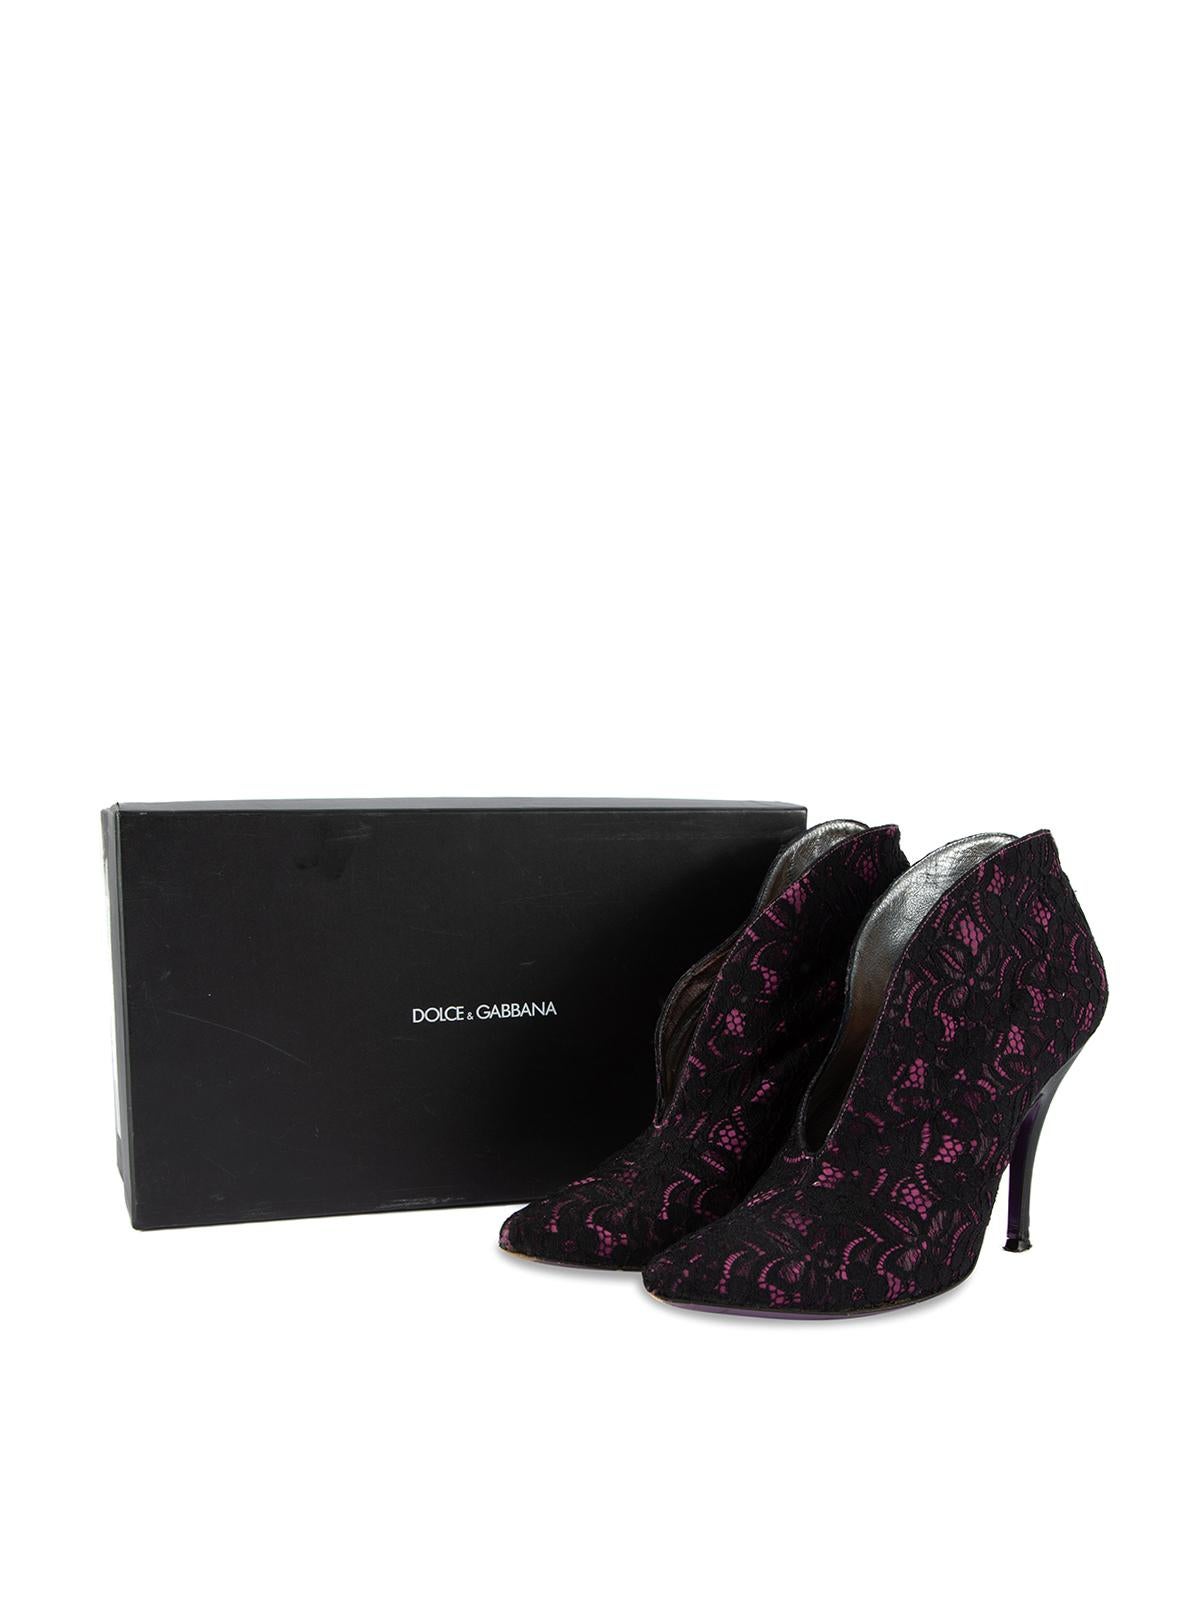 Pre-Loved Dolce & Gabbana Women's Black and Pink Floral Lace Ankle Booties For Sale 3